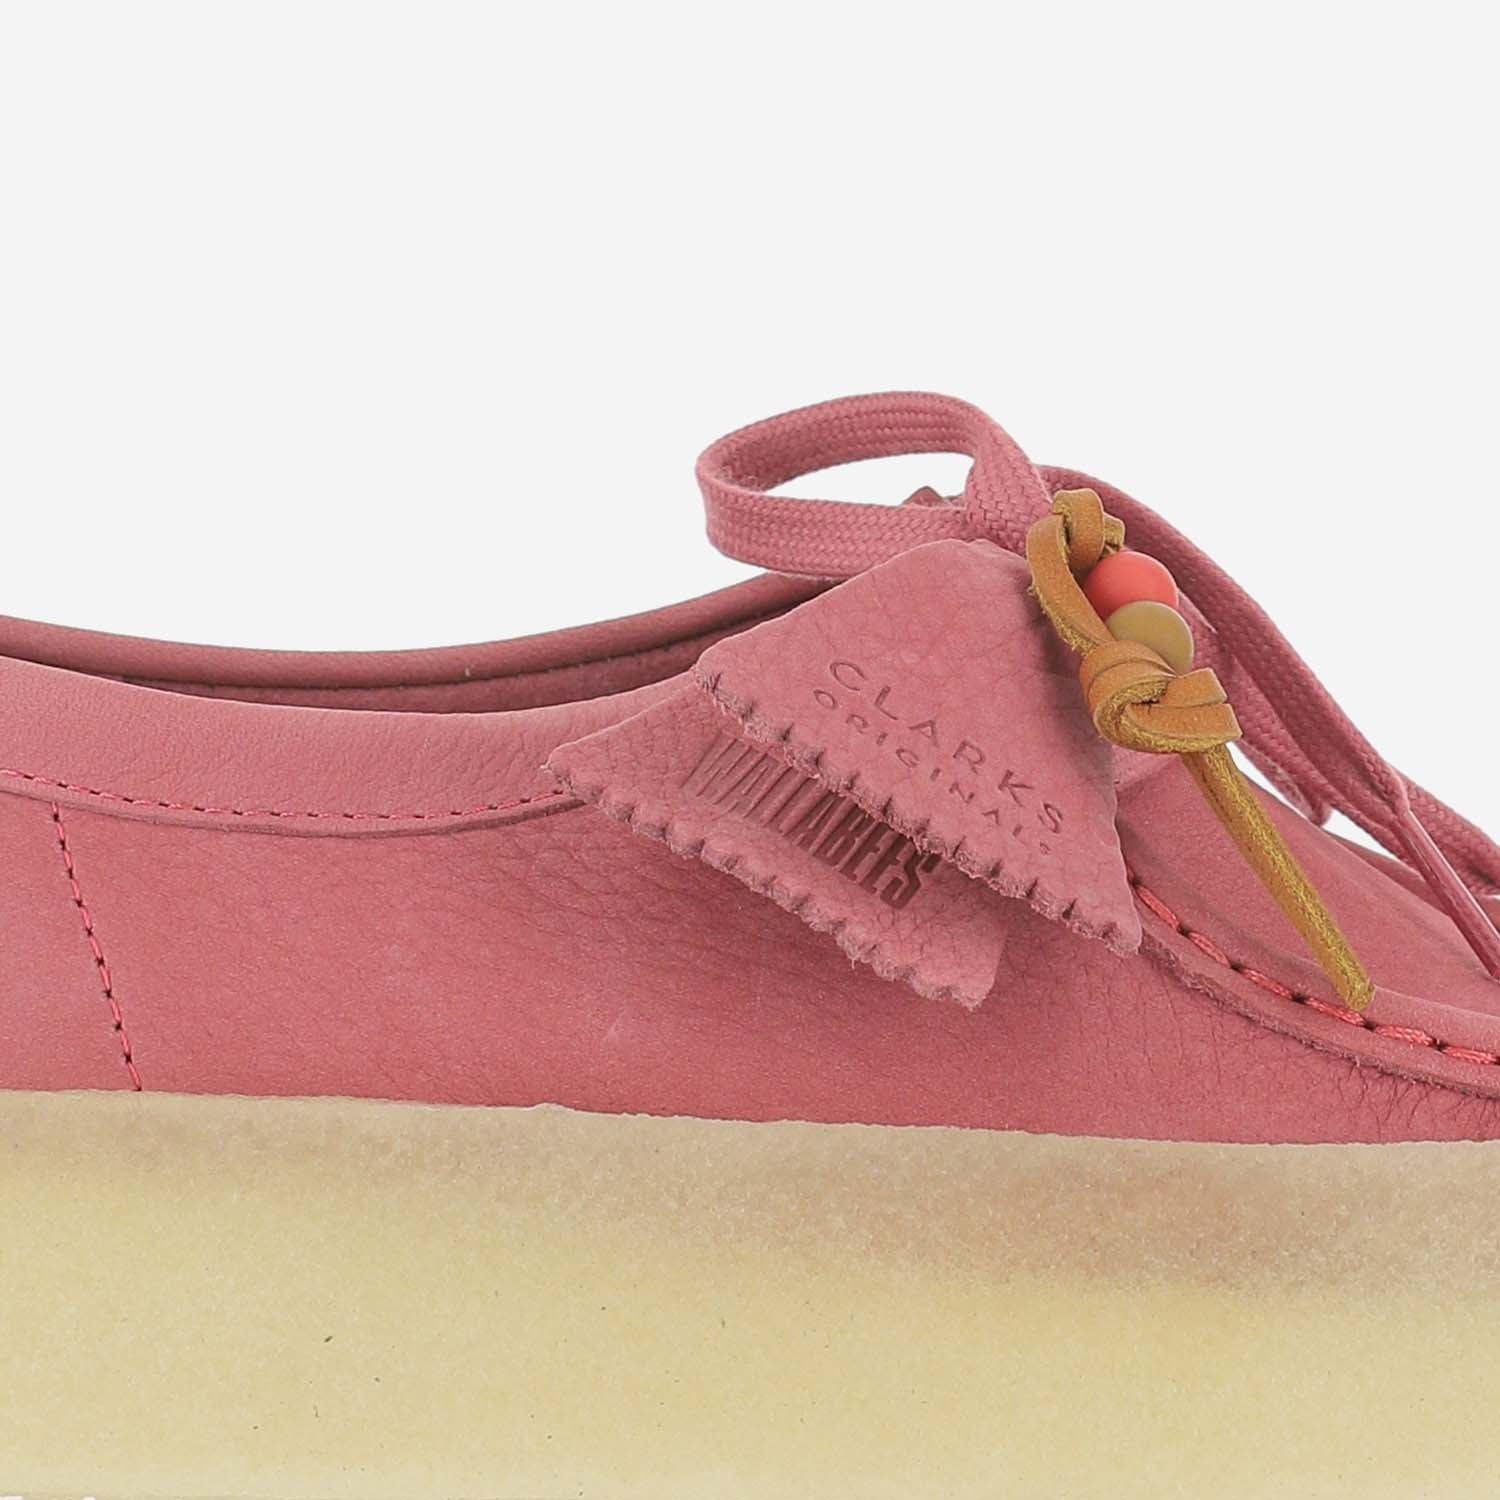 Clarks Leather Flat Shoes in Pink Nubuck (Red) - Save 16% | Lyst